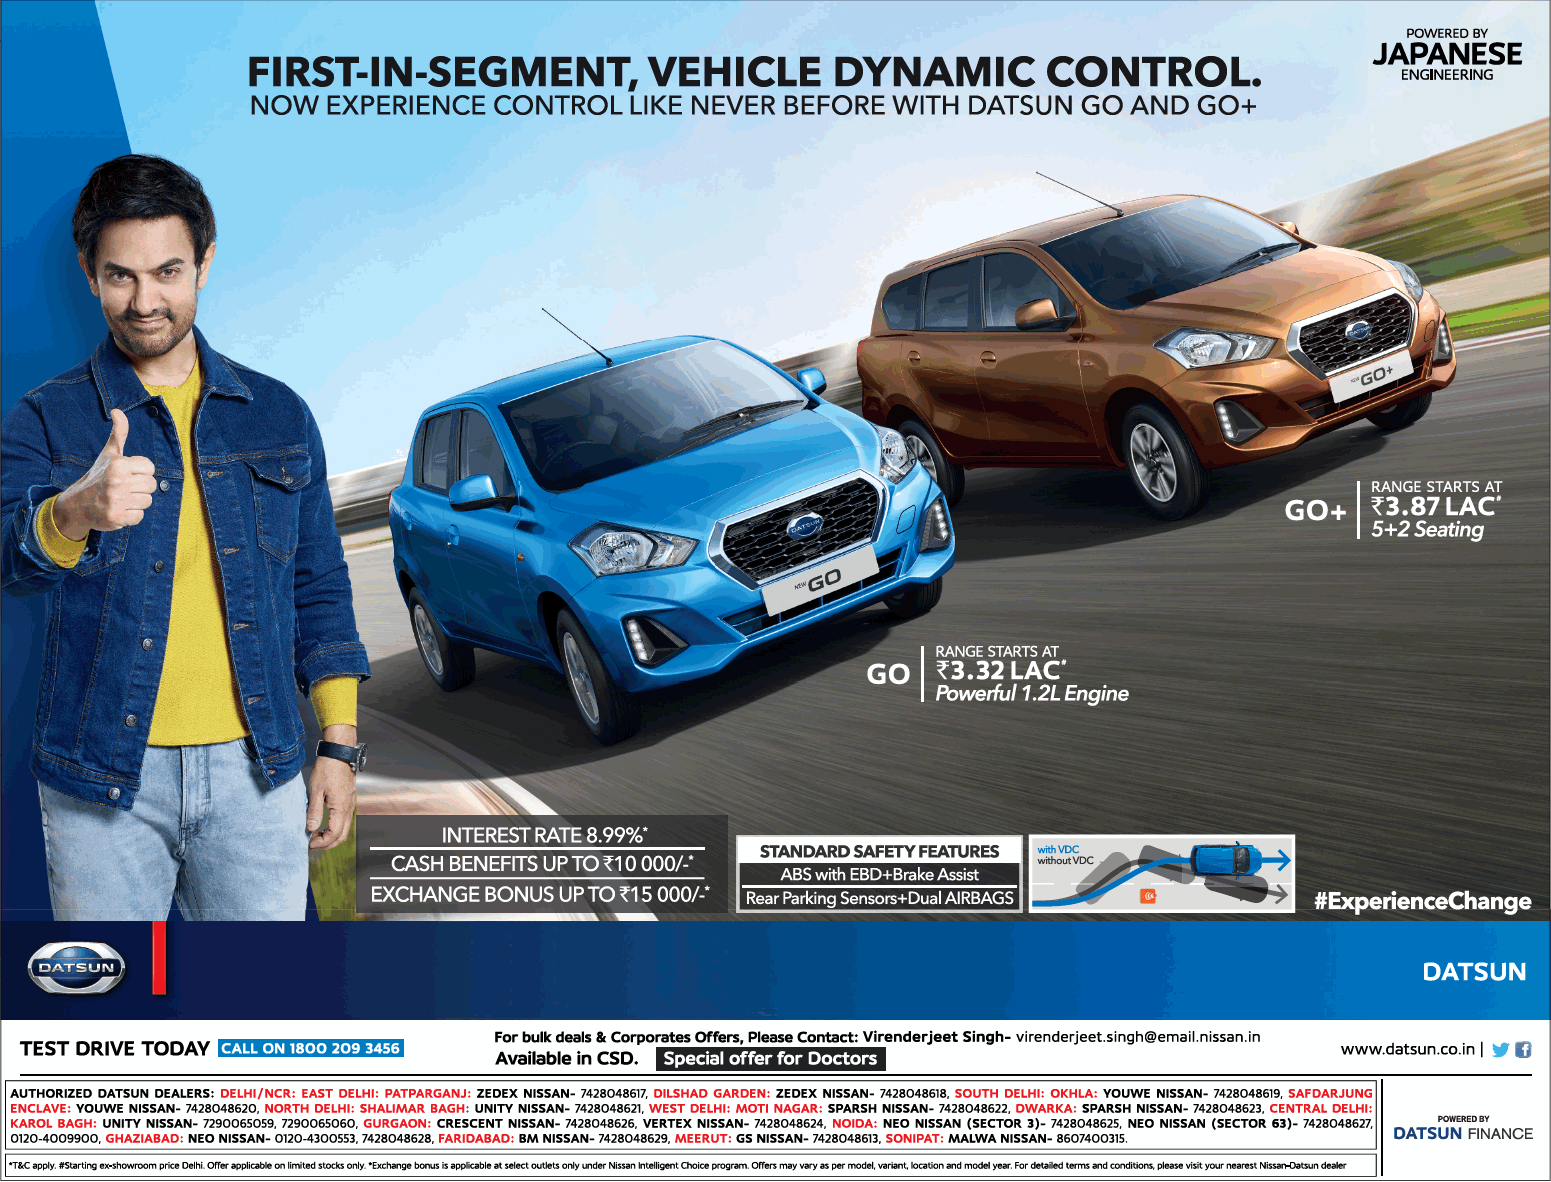 datsun-cars-first-in-segment-vehicle-dynamic-control-ad-delhi-times-15-06-2019.png